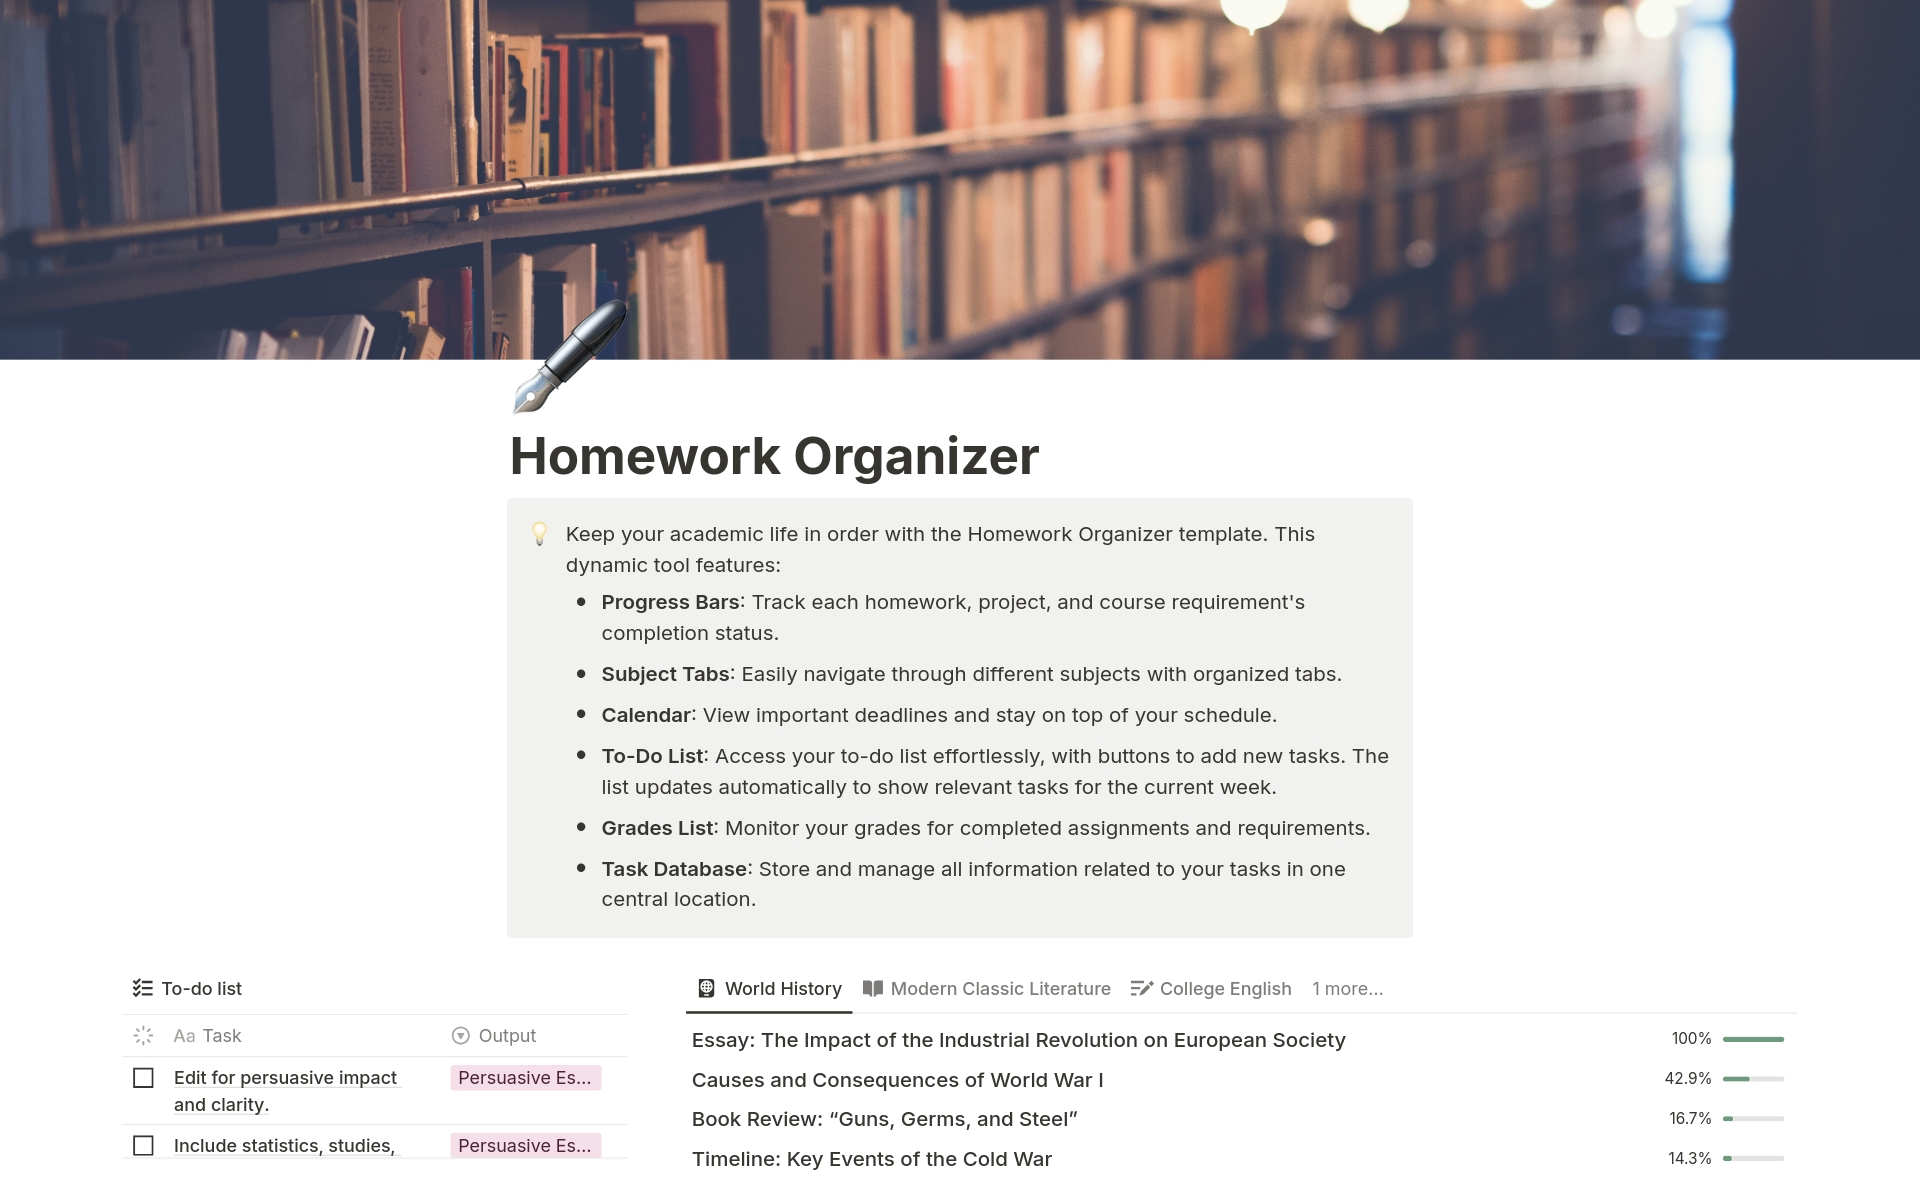 Streamline your homework management and never miss a deadline with this all-in-one organizer.